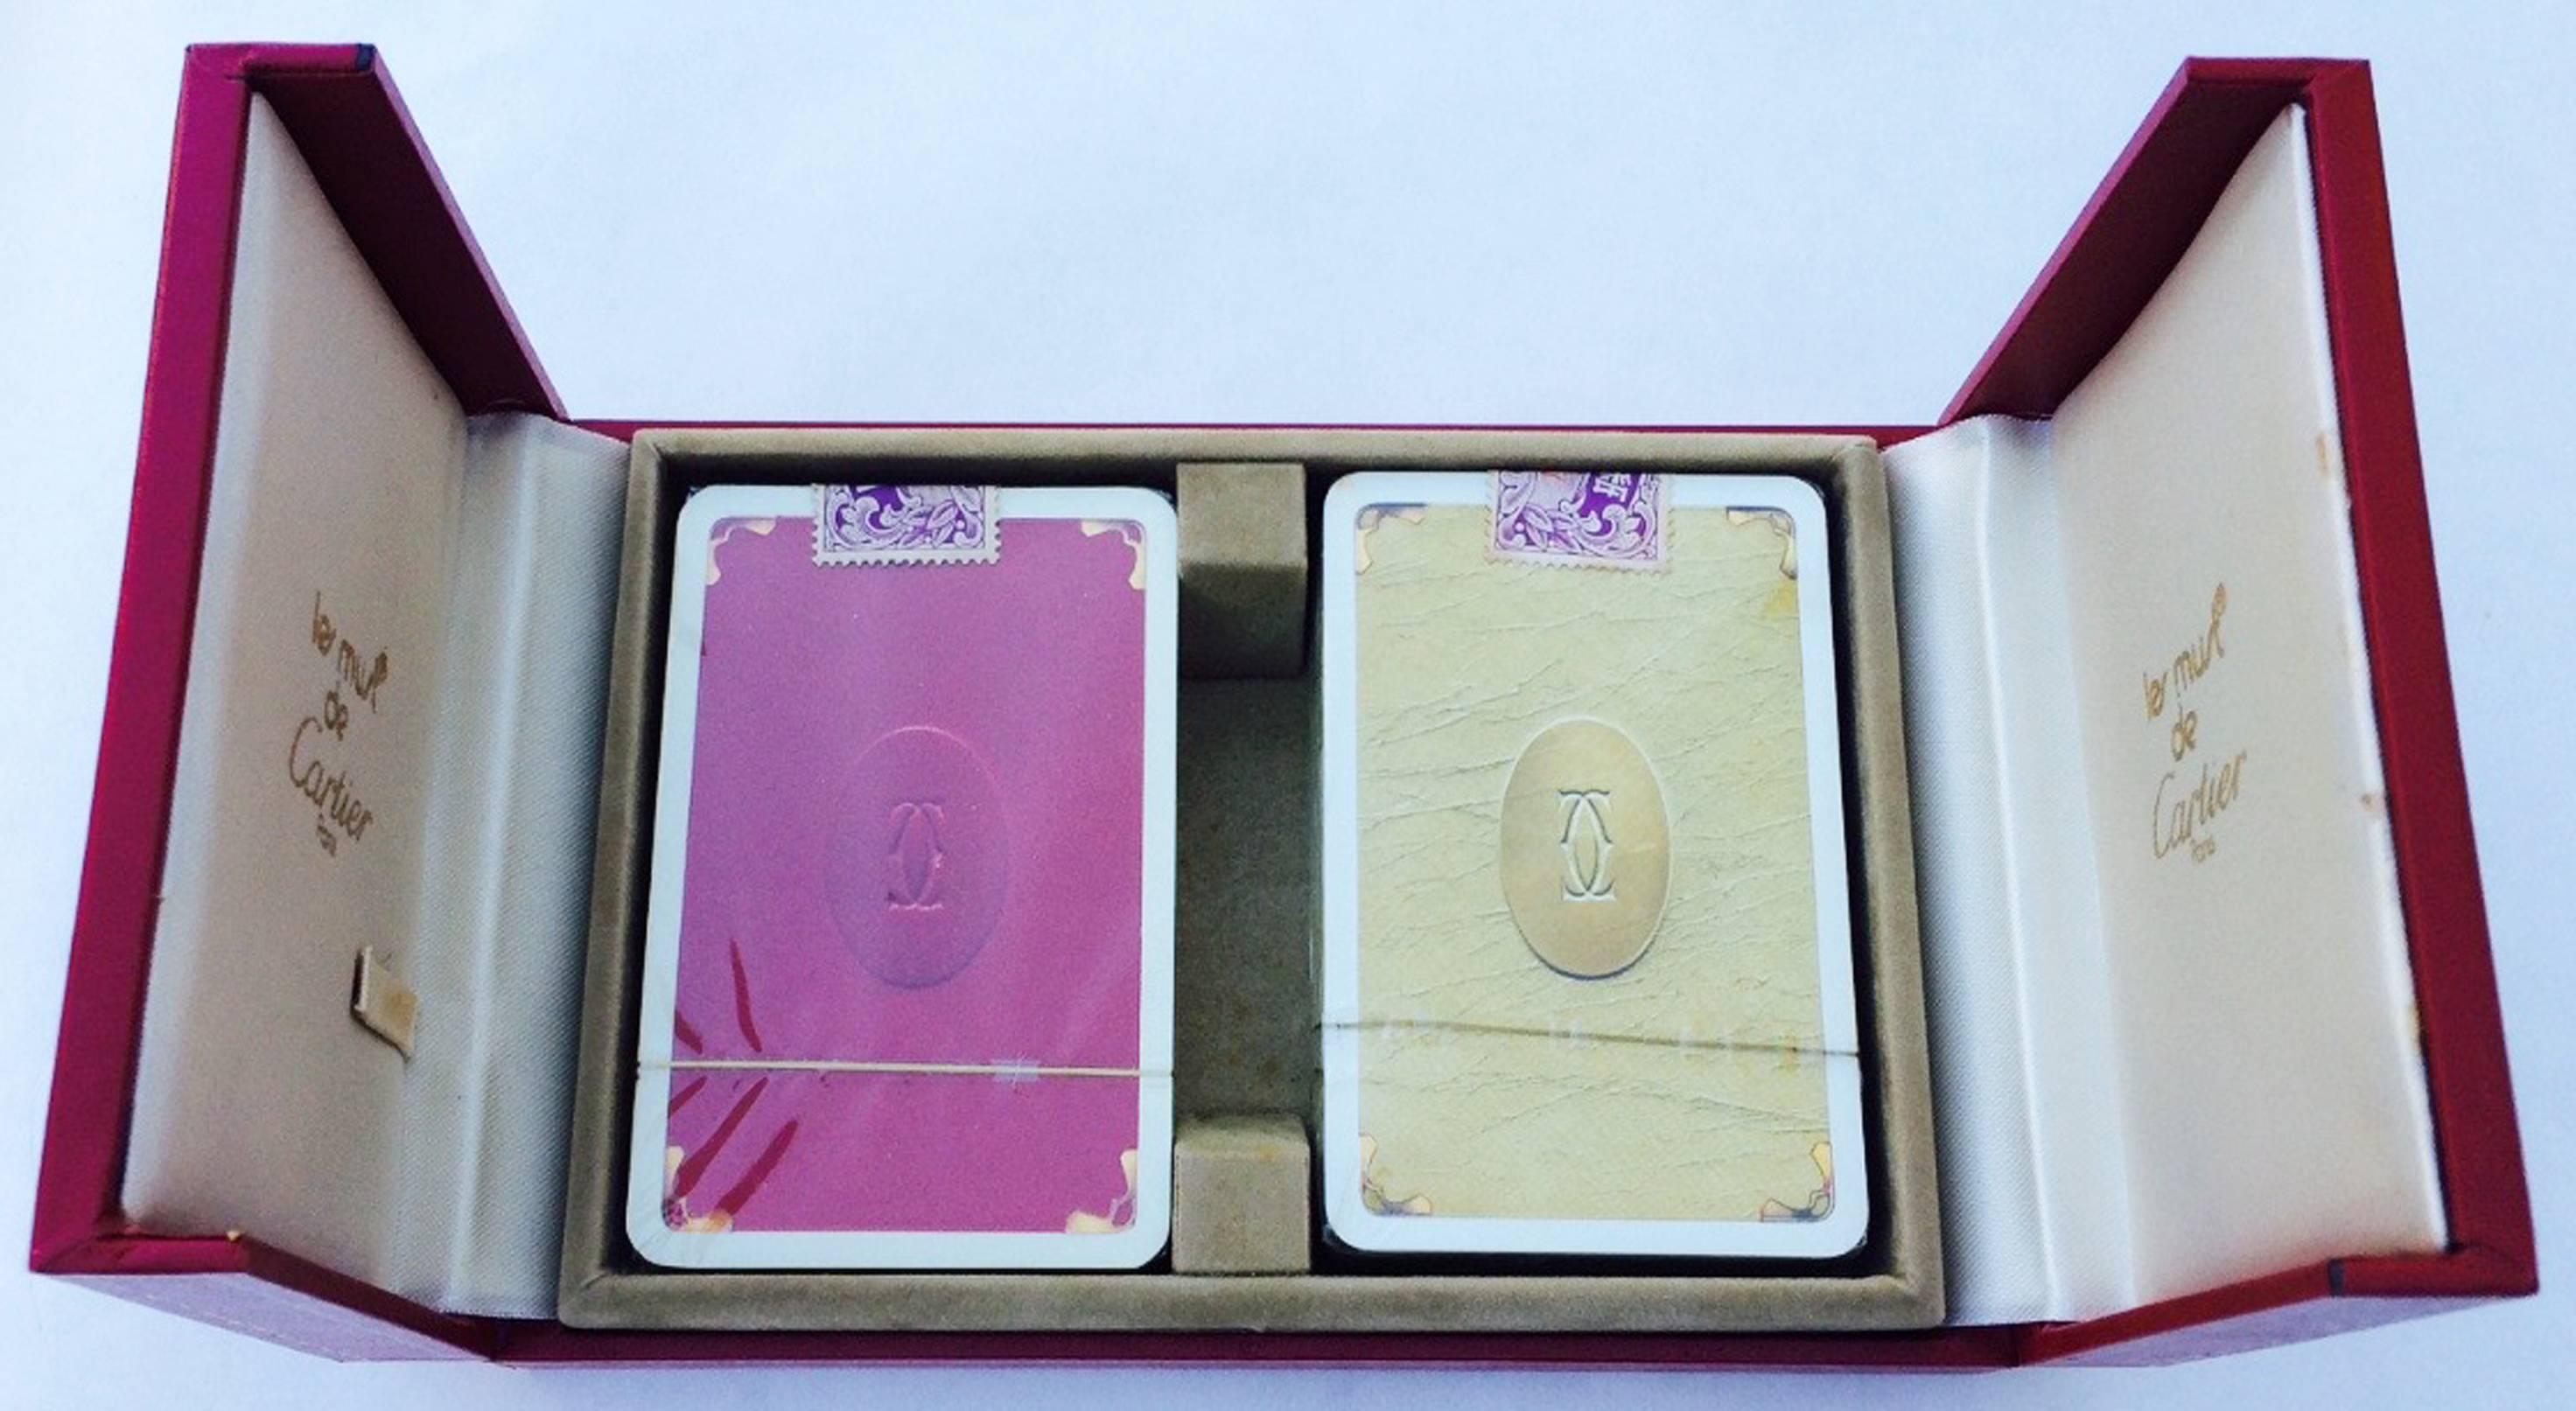 A fine Cartier double box set, playing cards. Authentic unused/unopened double deck of cards and signature box. Item pristine, previously unused.